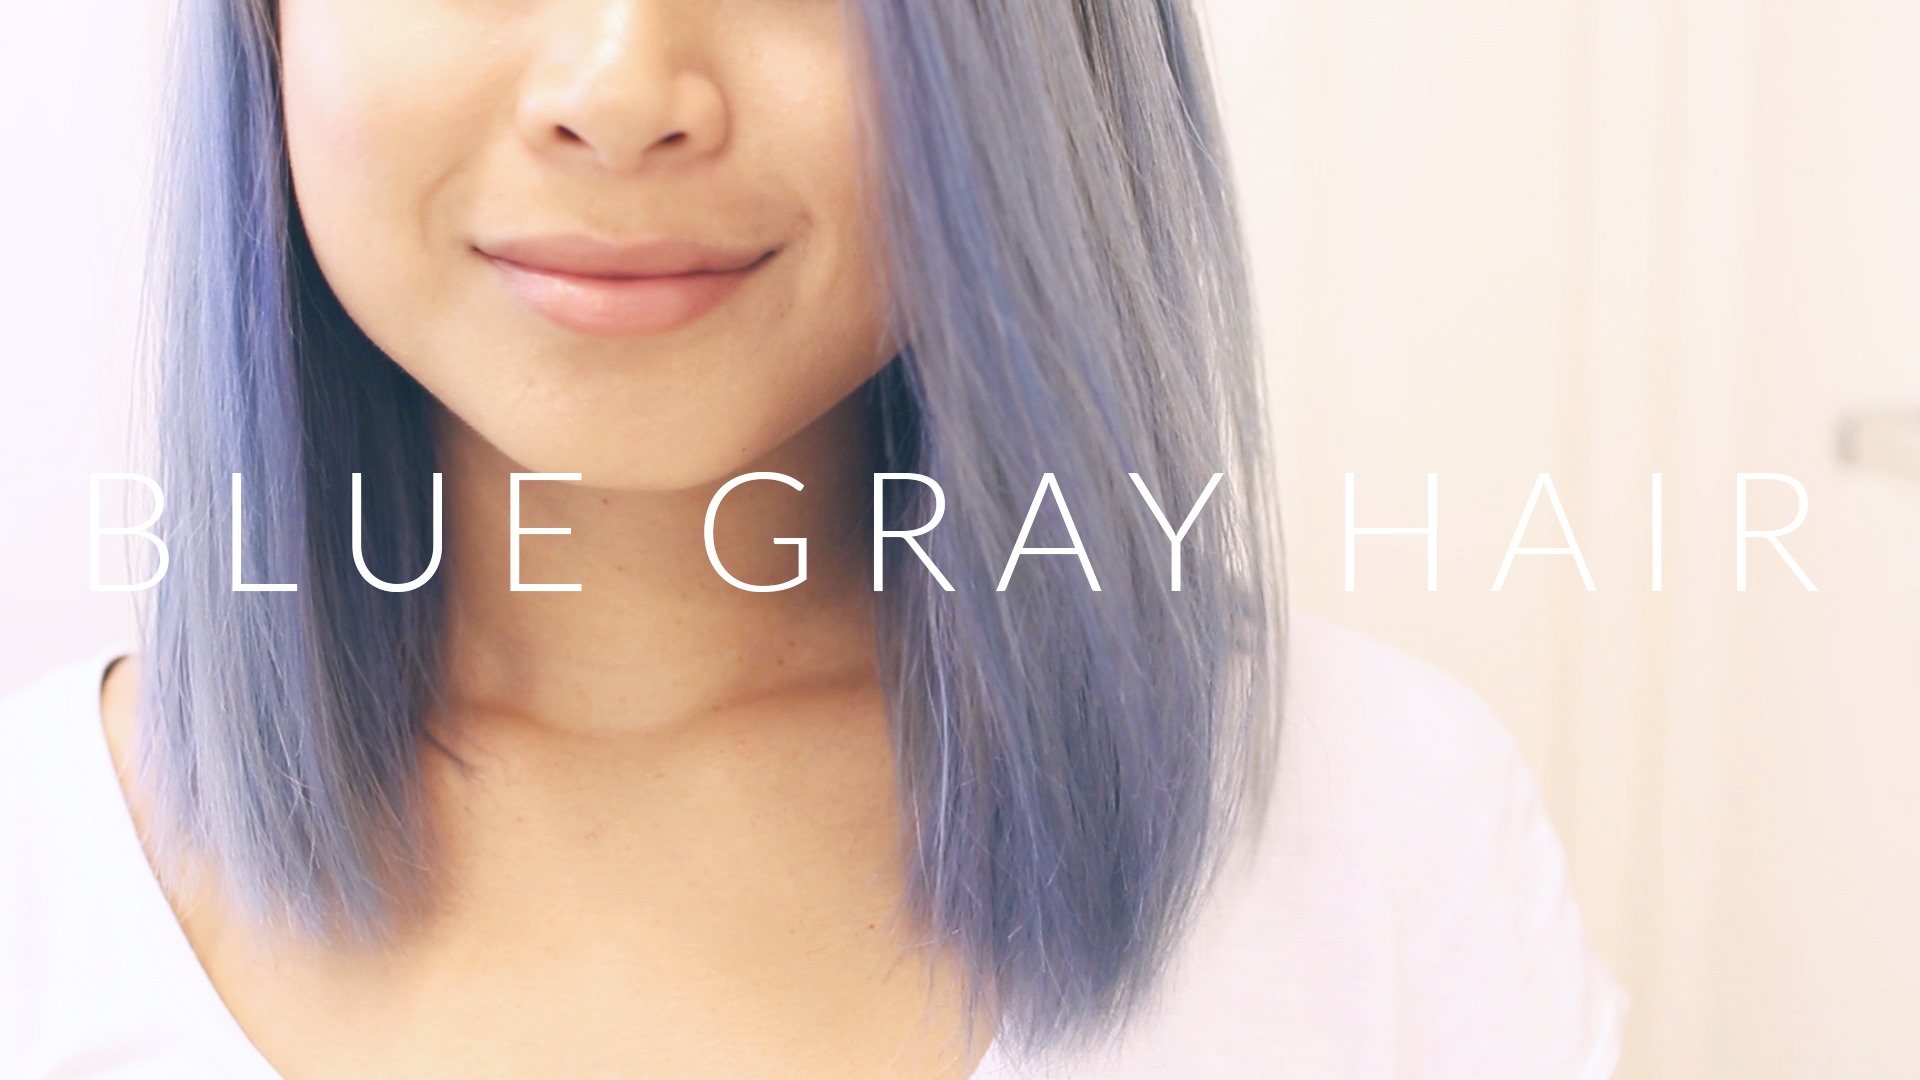 Blue Gray Hair Color: 10 Stunning Shades to Try - wide 6